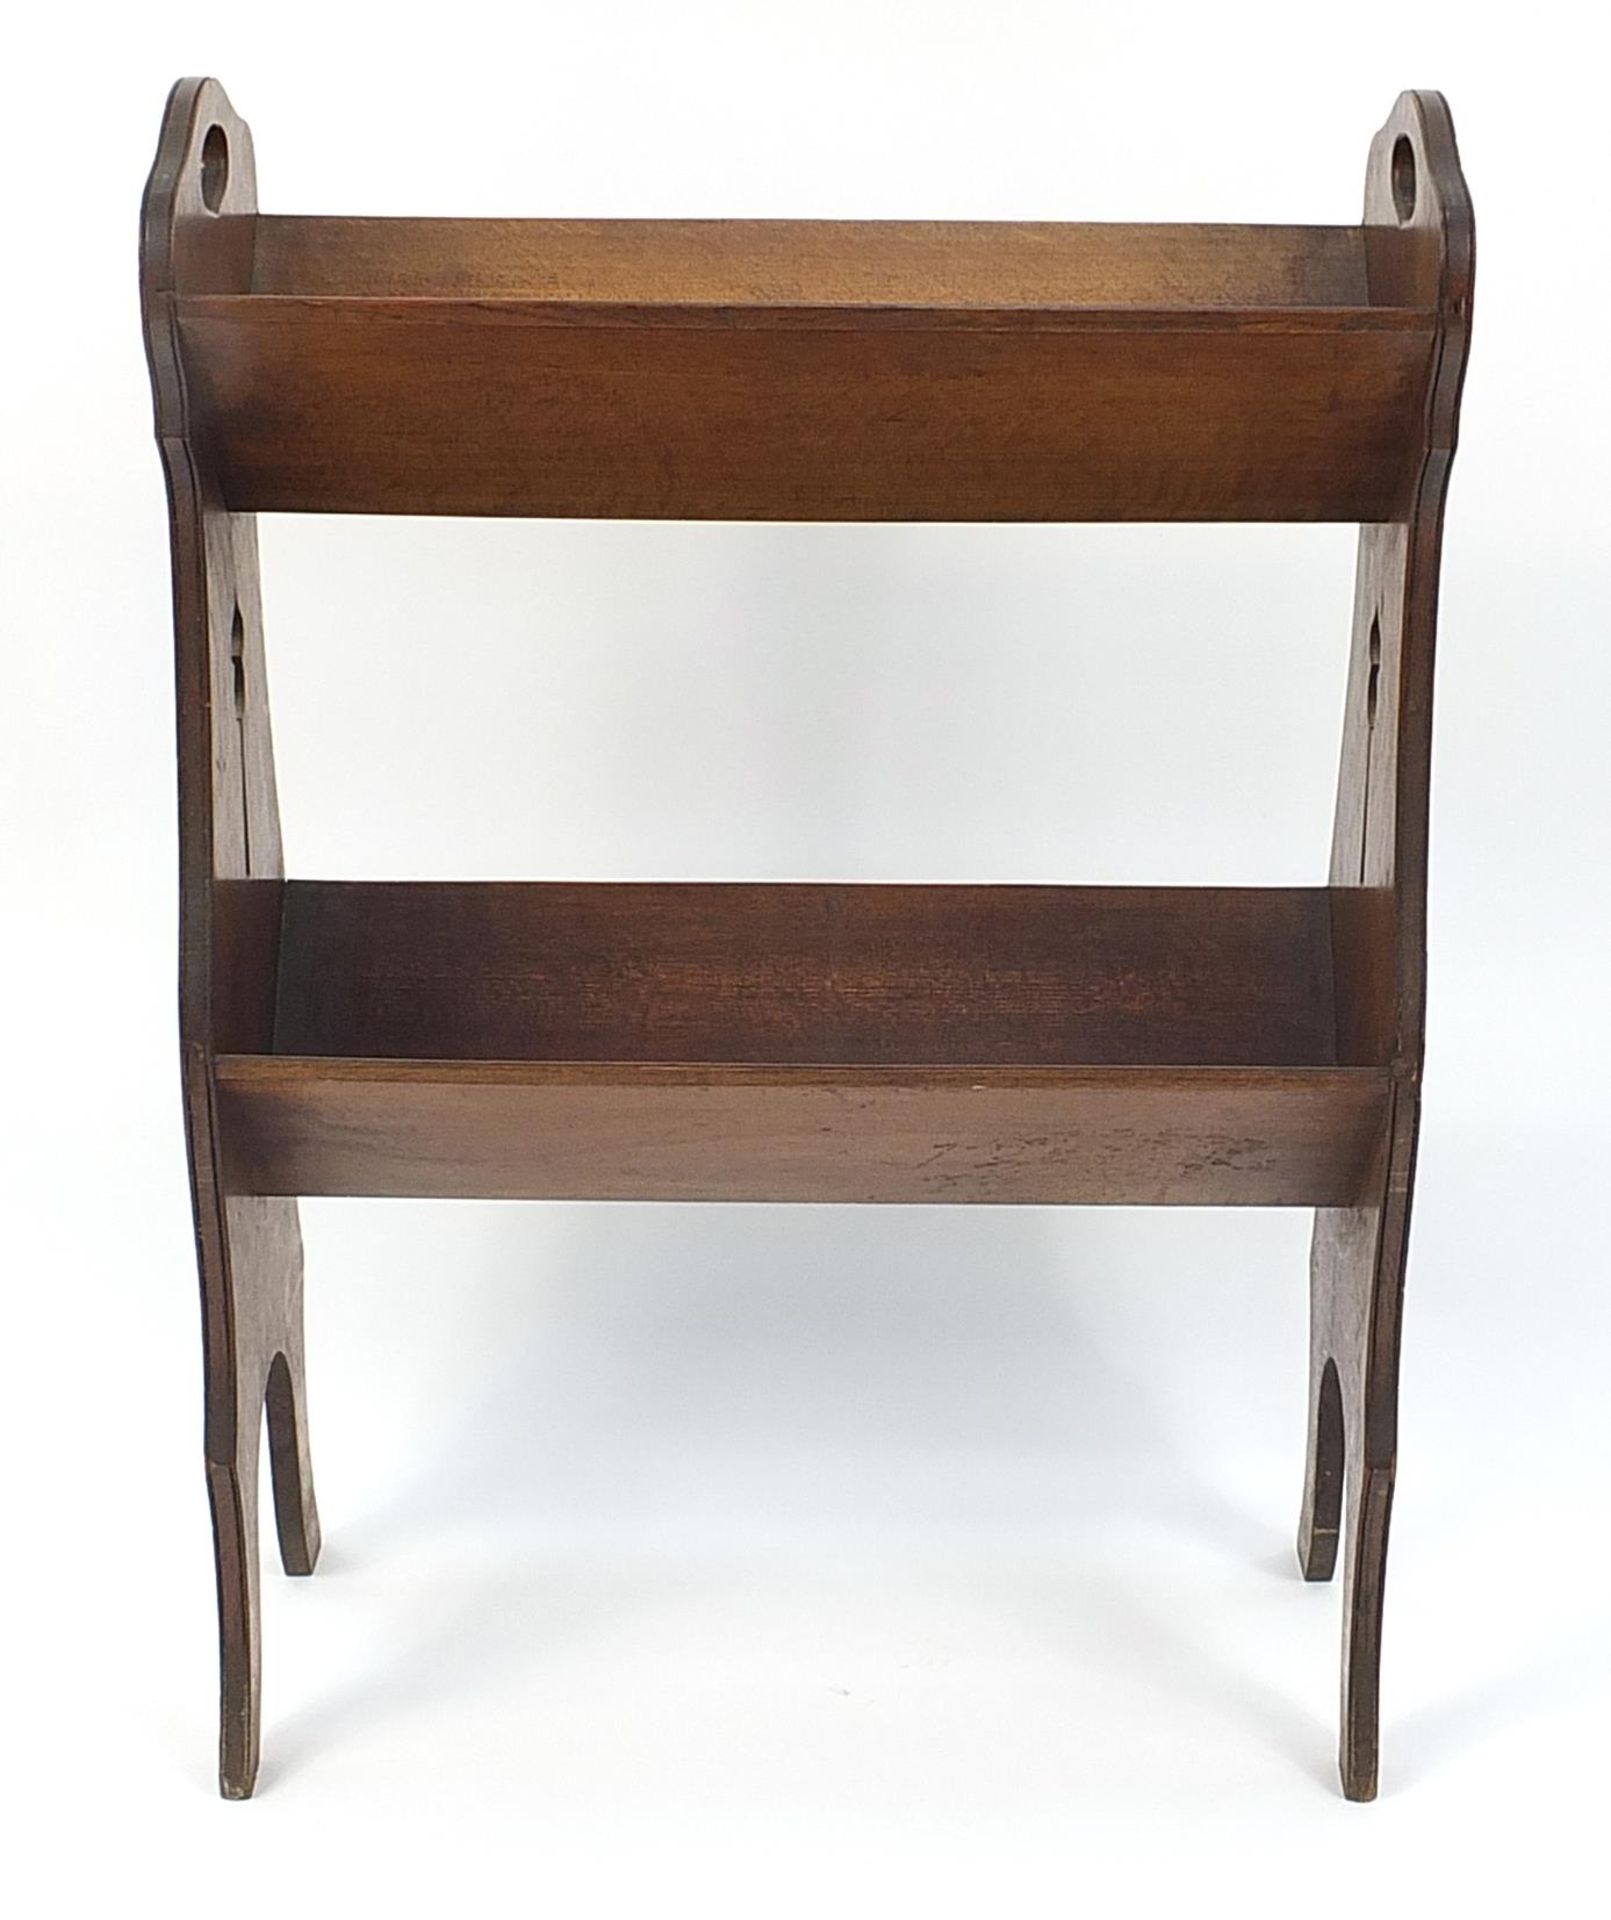 Art Nouveau oak book rack 76cm H x 53cm W x 23cm D - Image 3 of 3